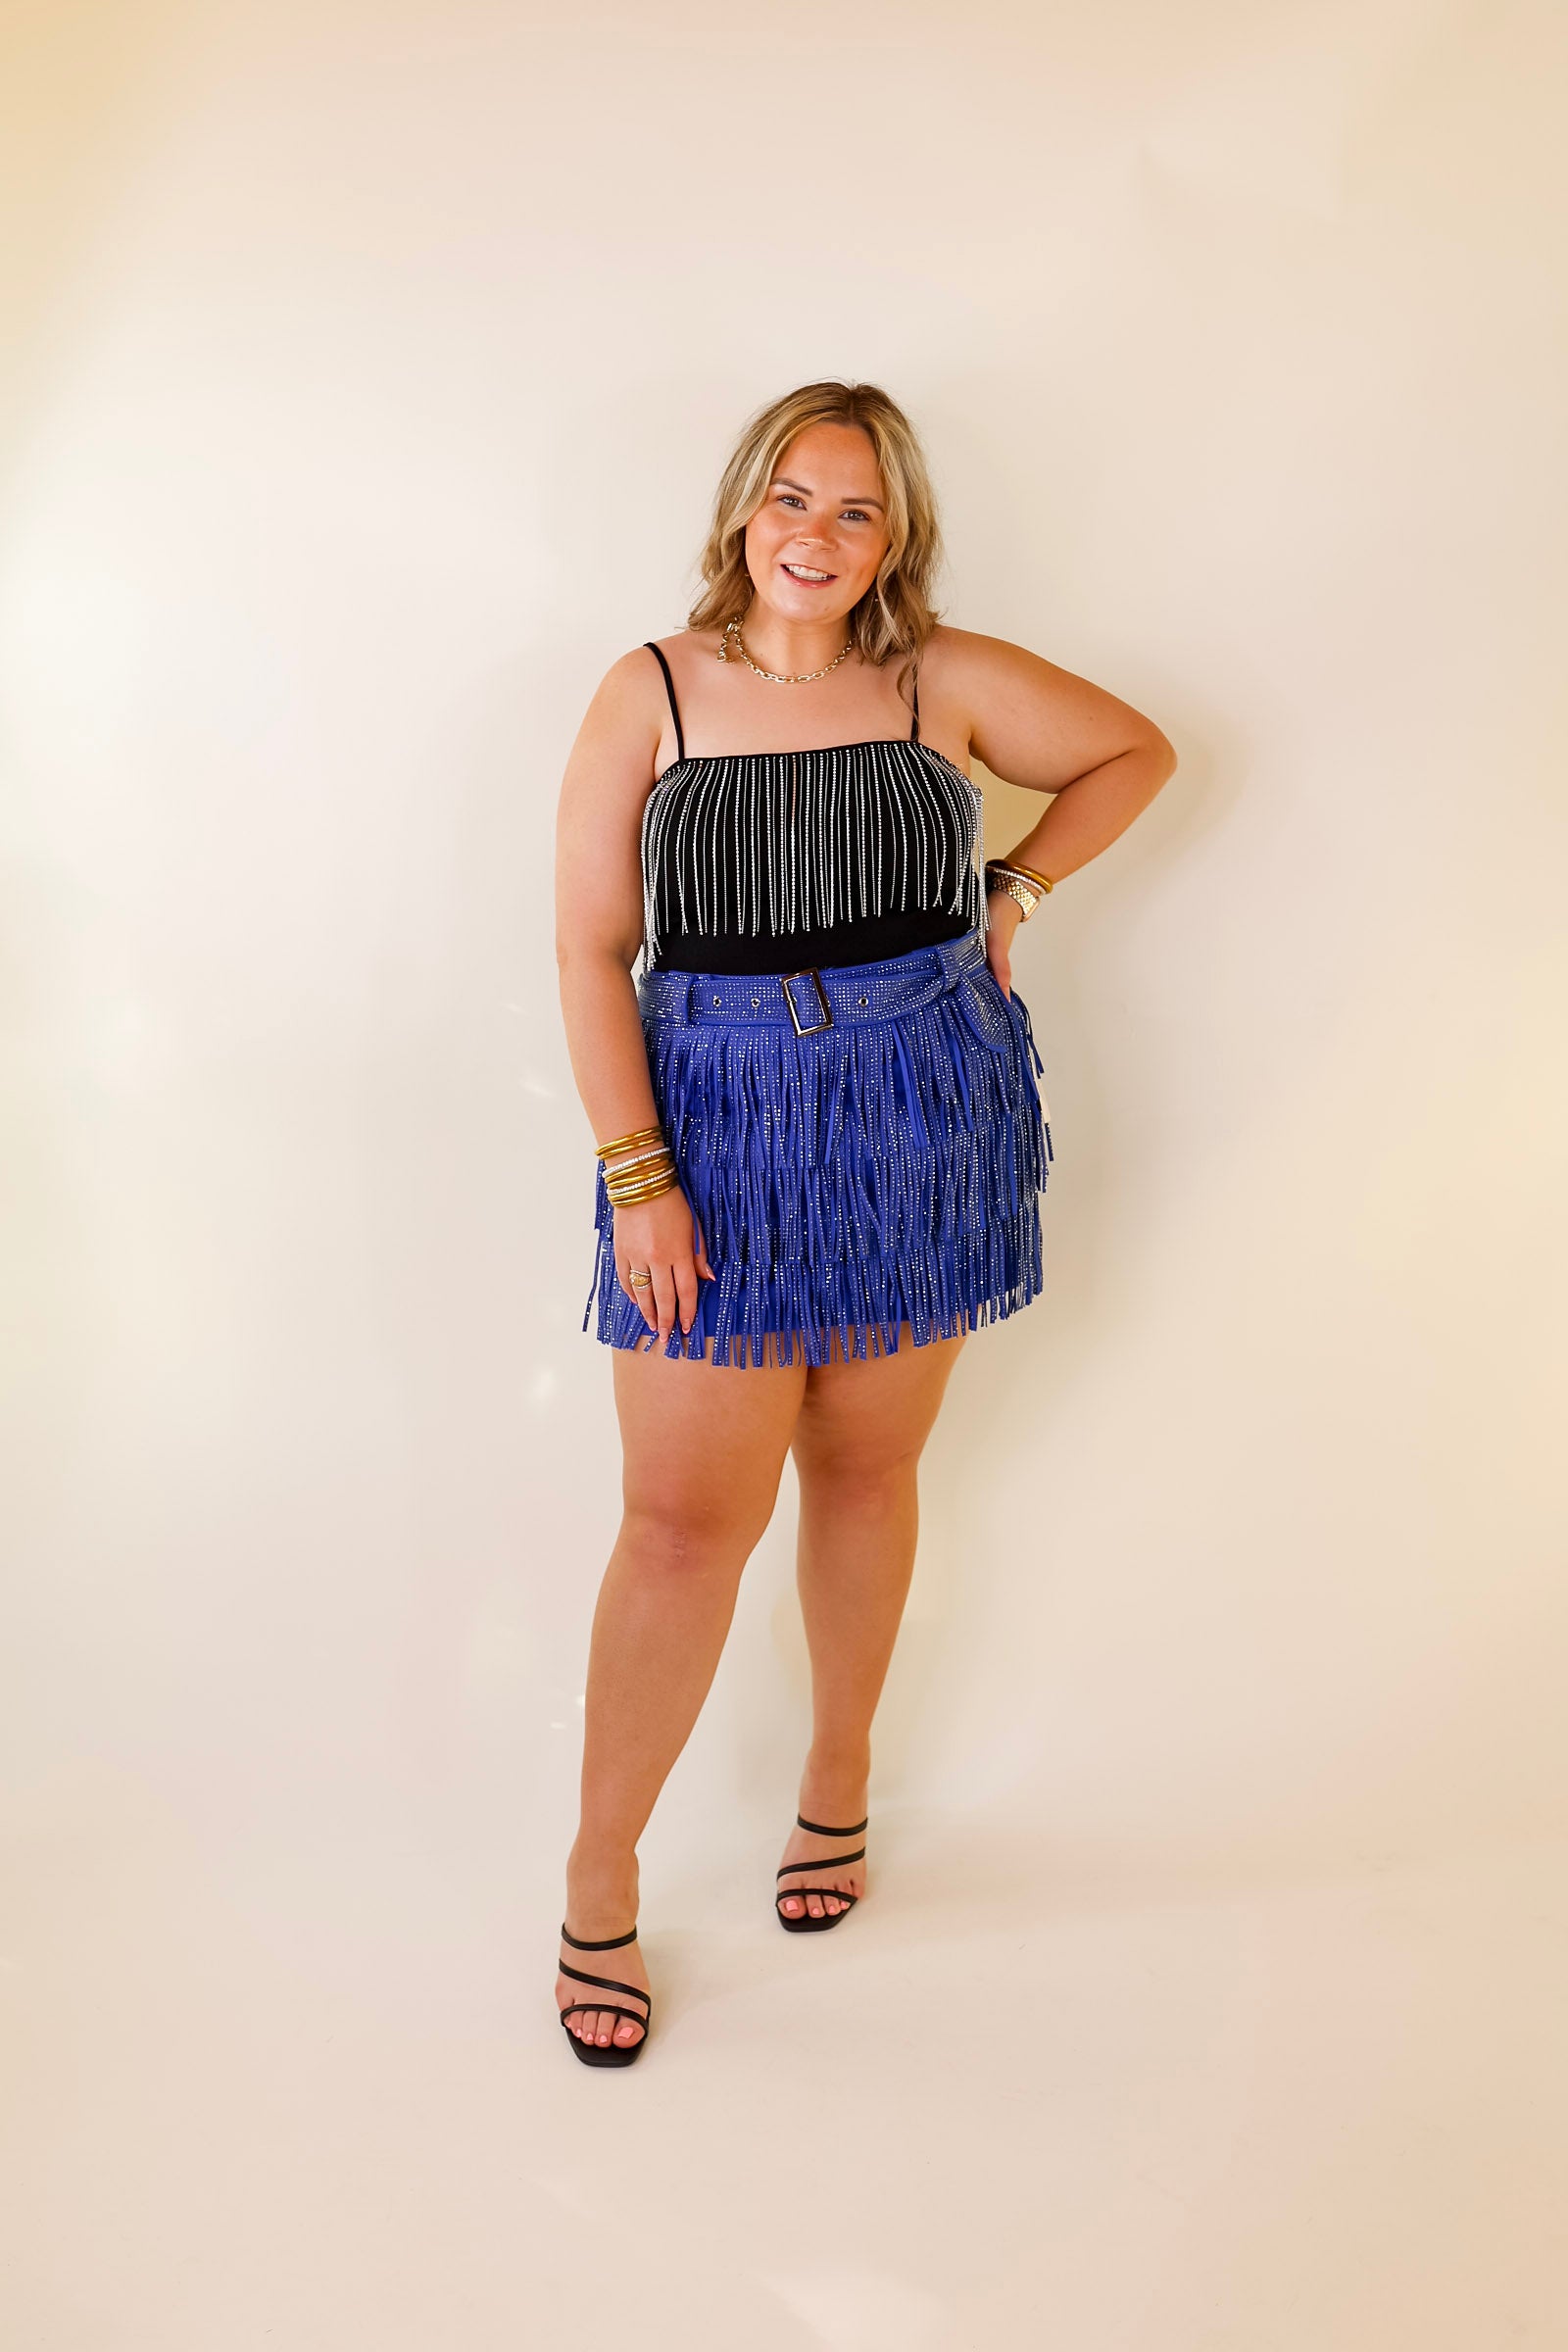 It Crowd Spaghetti Strap Top with Crystal Fringe in Black